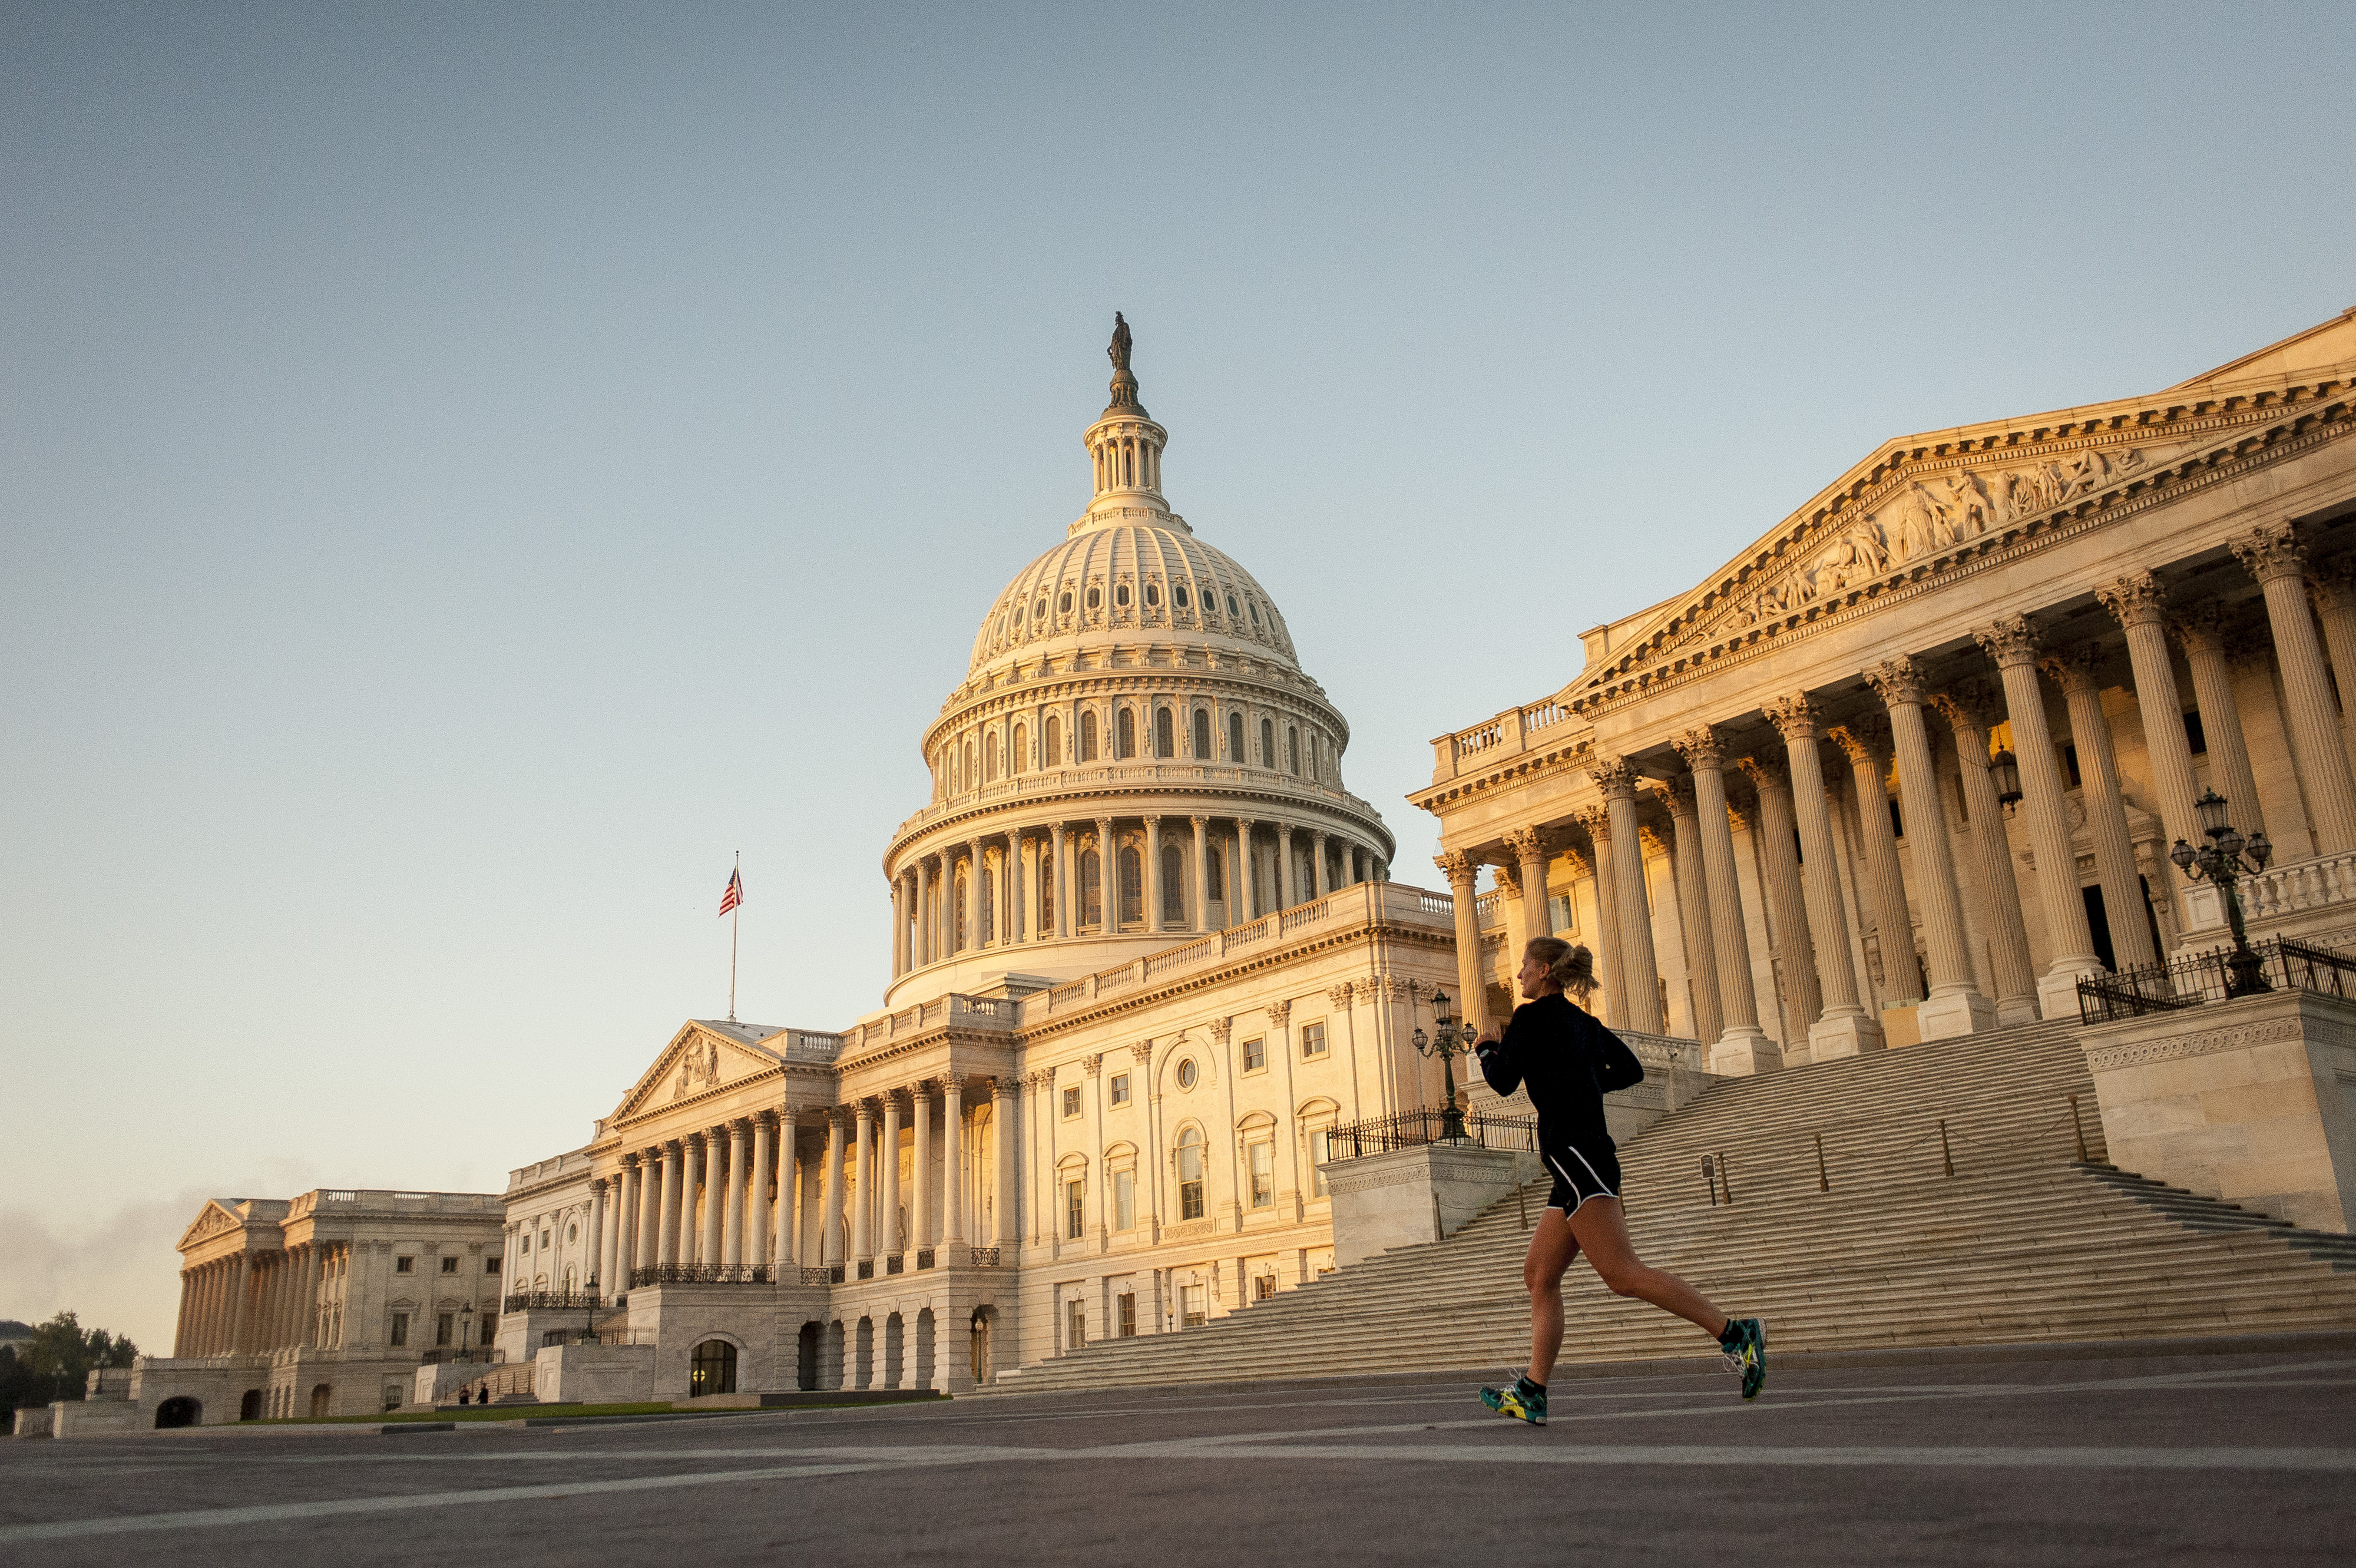 A jogger runs past the United States Capitol building at sunrise in Washington, D.C., U.S., on Tuesday, Oct. 15, 2013. (Pete Marovich—Bloomberg/Getty Images)